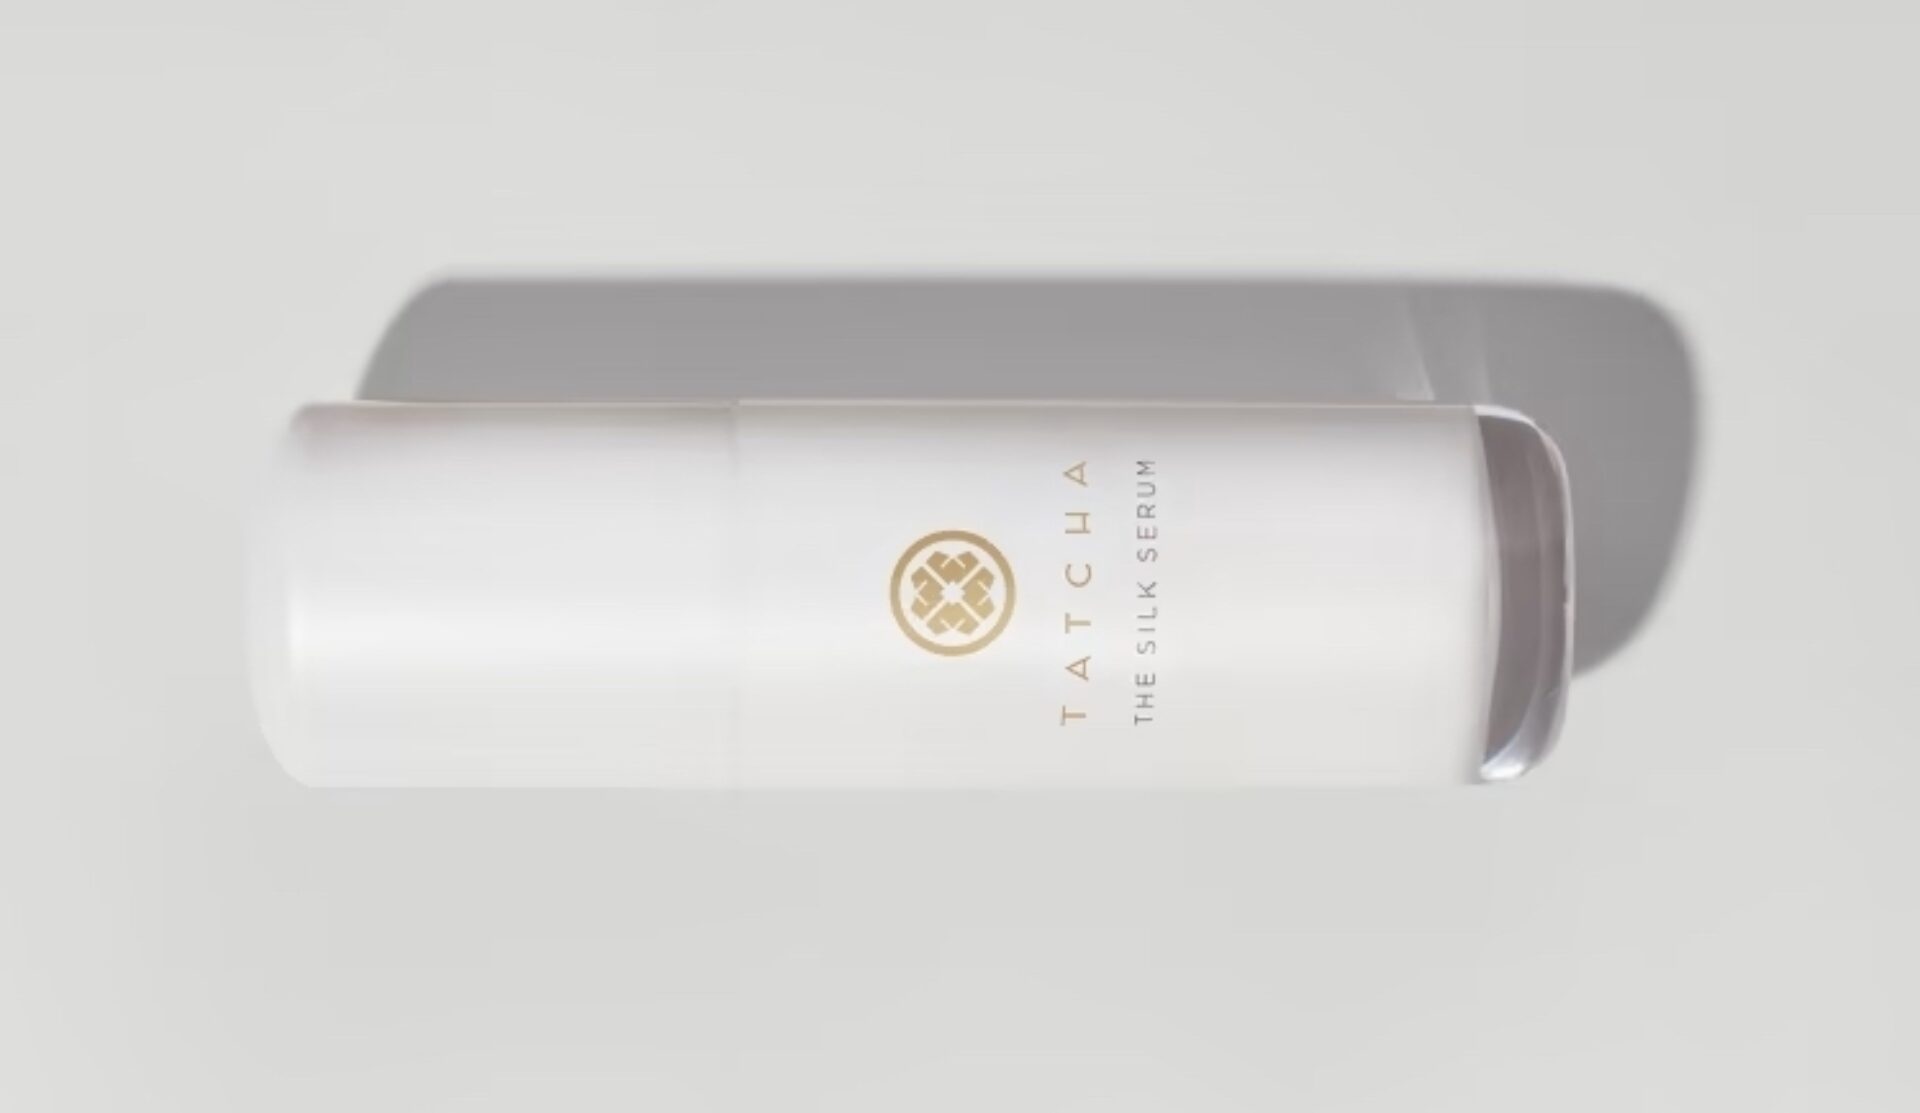 Tatcha just launched its brand new product, the Silk Serum, a retinol alternative for people with sensitive skin. The perfect solution for youthful, glowing skin with none of the pesky dryness that comes with retinol.